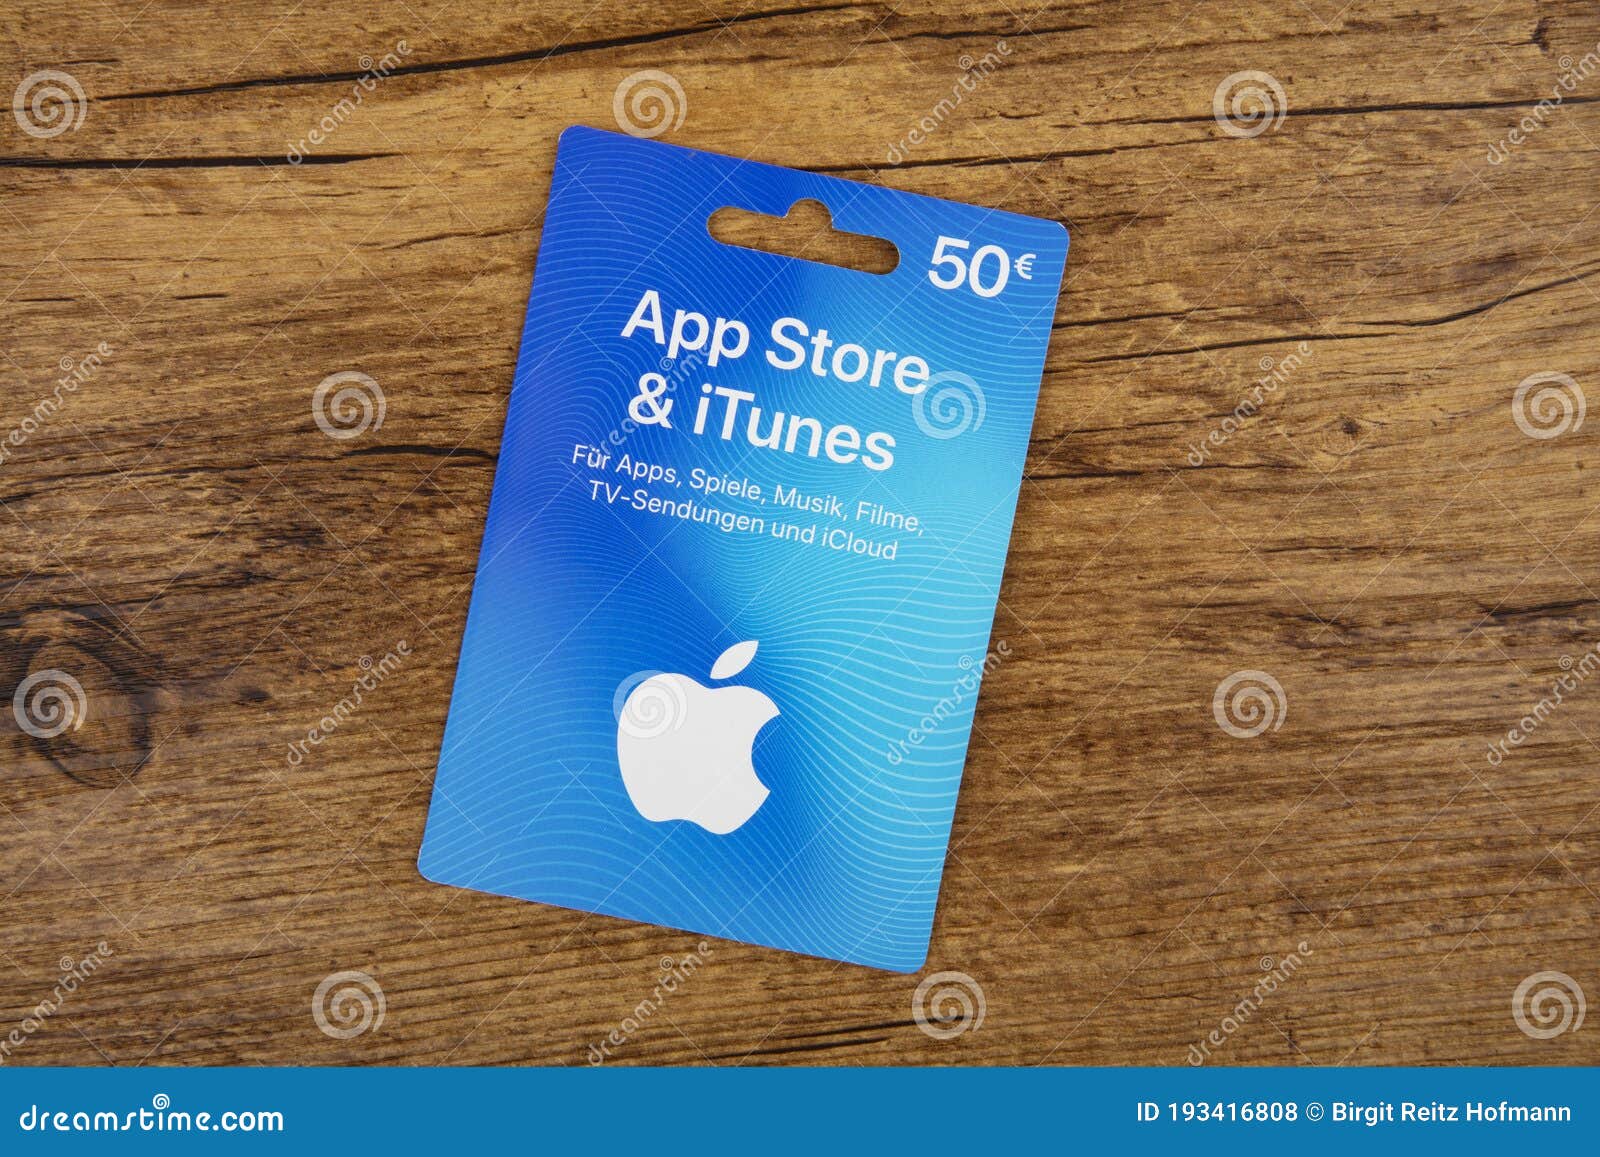 Are Apple Gift Cards the Same As Itunes 